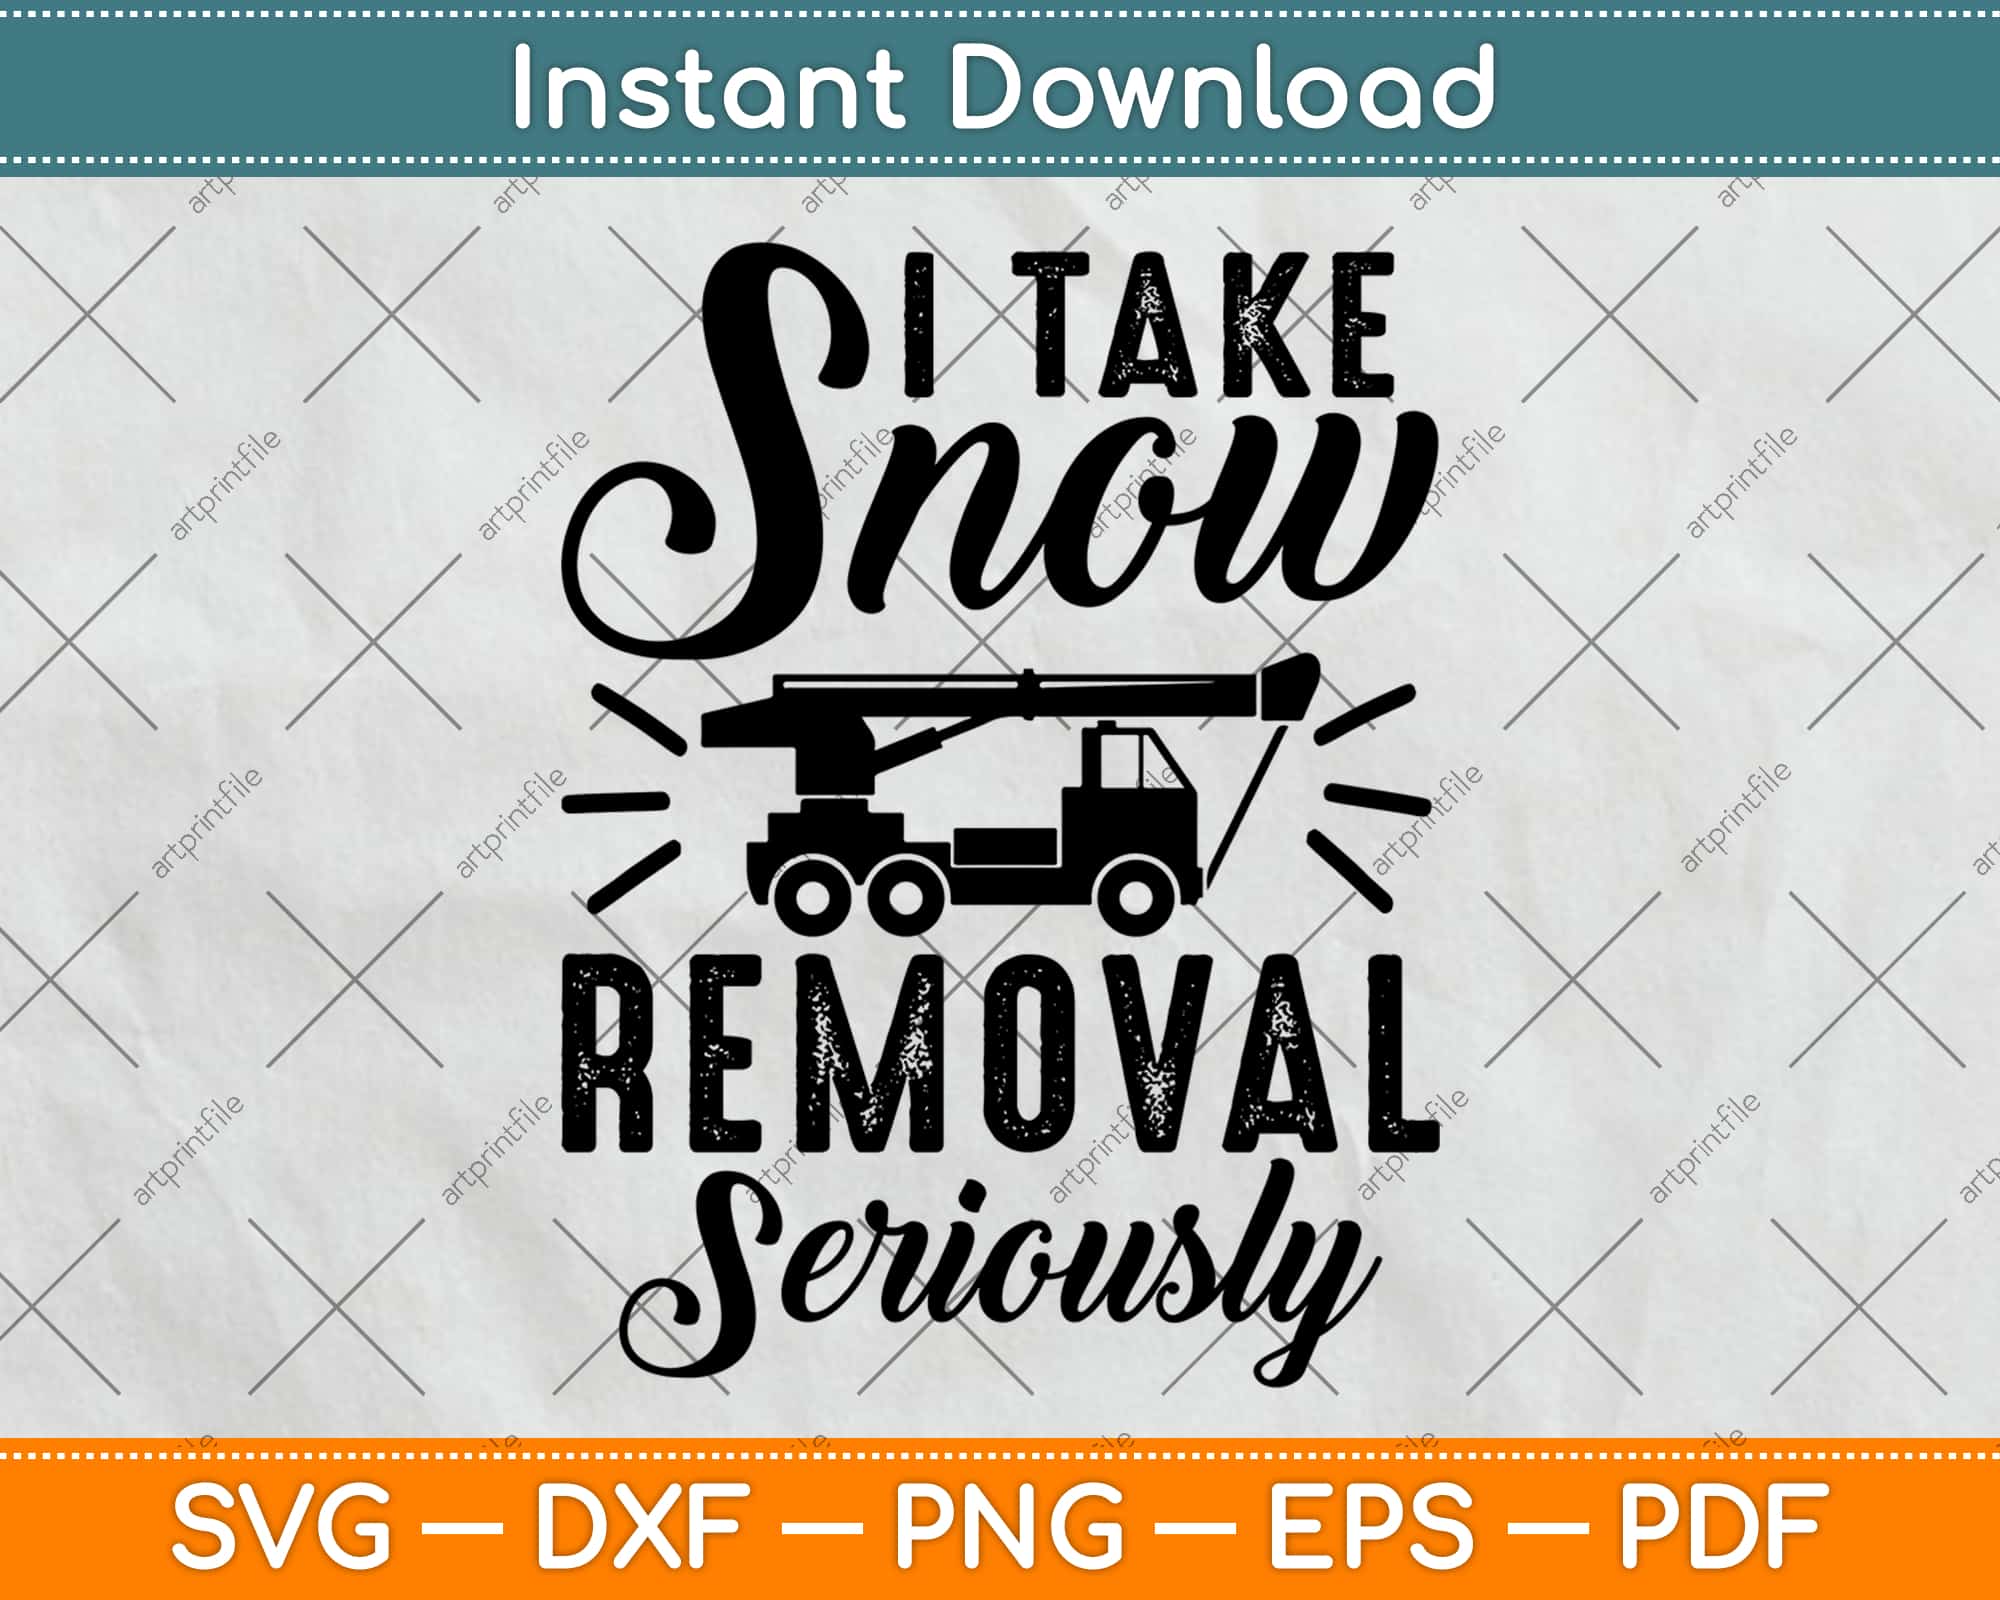 funny snow removal pictures